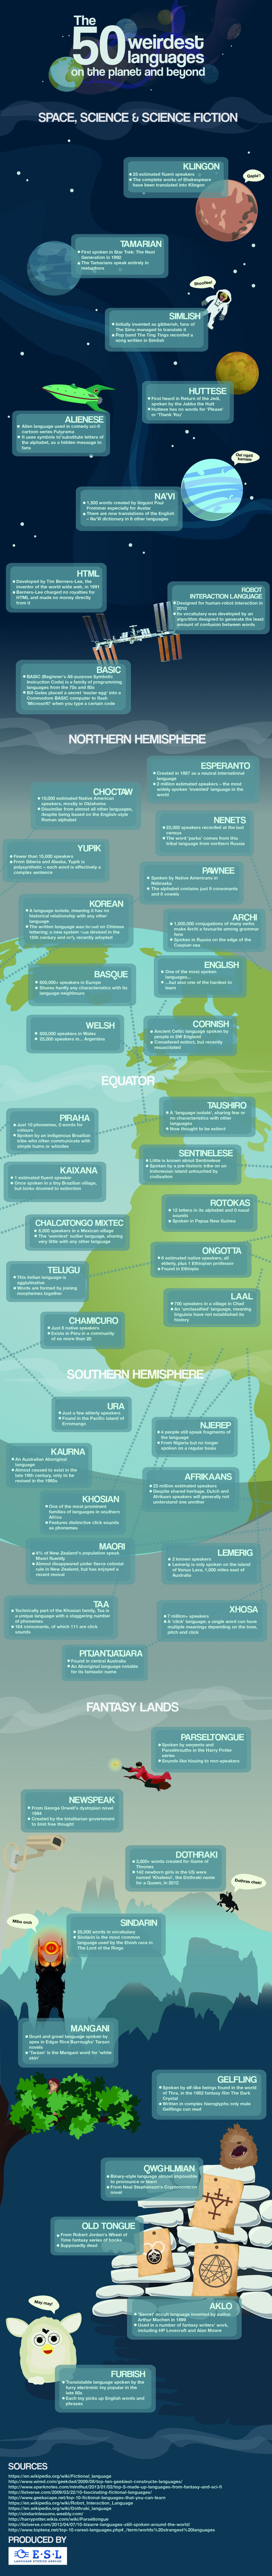 The 50 Weirdest Languages (On the planet and beyond!) Infographic